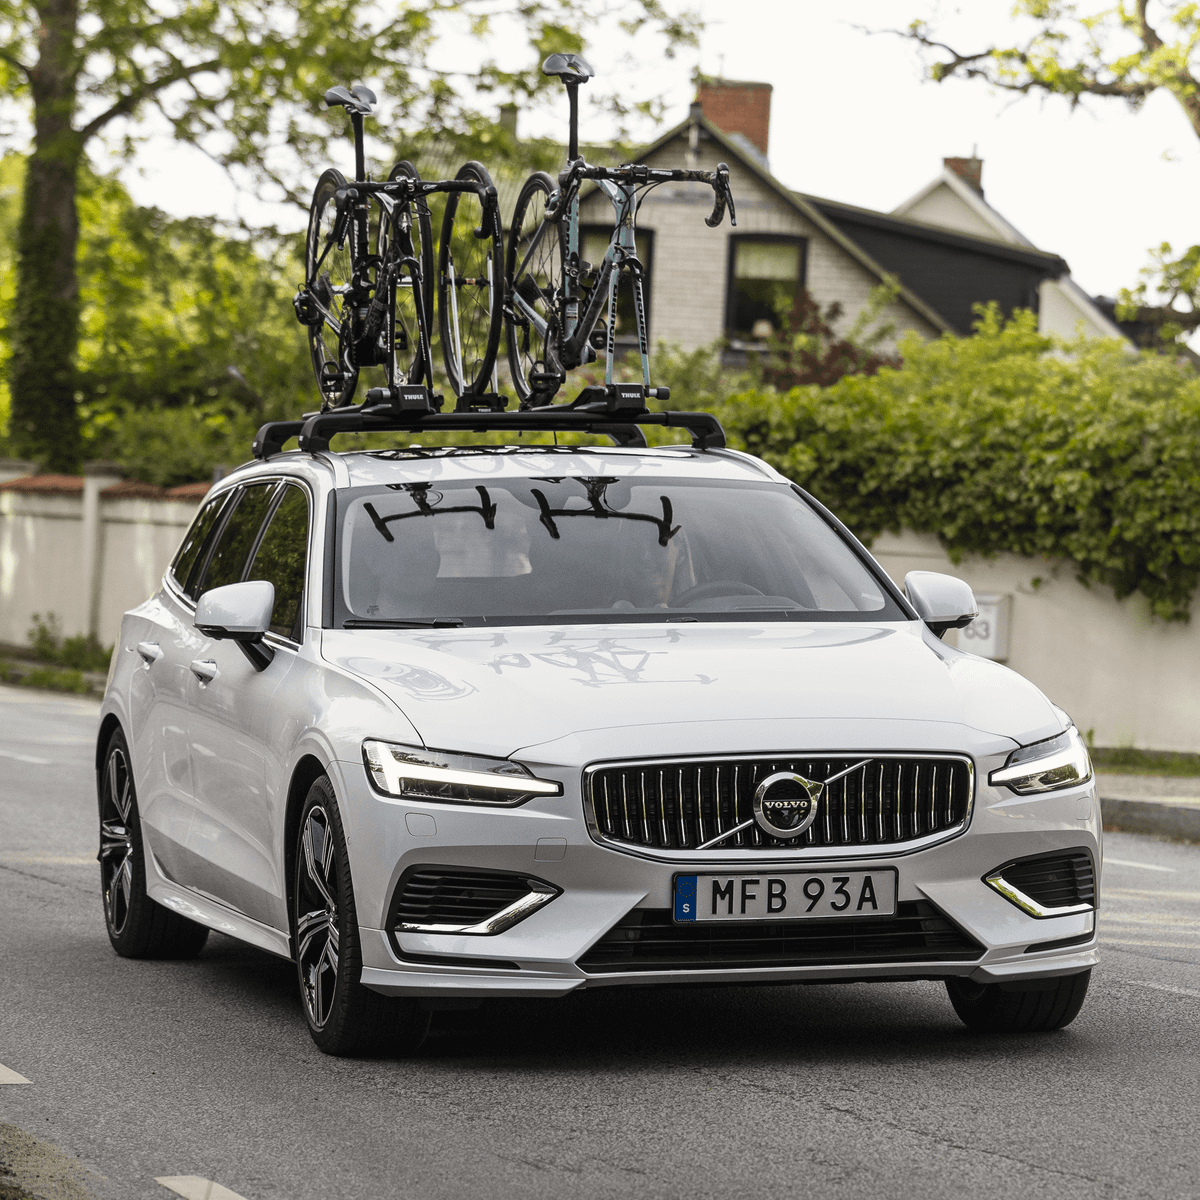 A car with several bikes mounted on the roof is approaching.